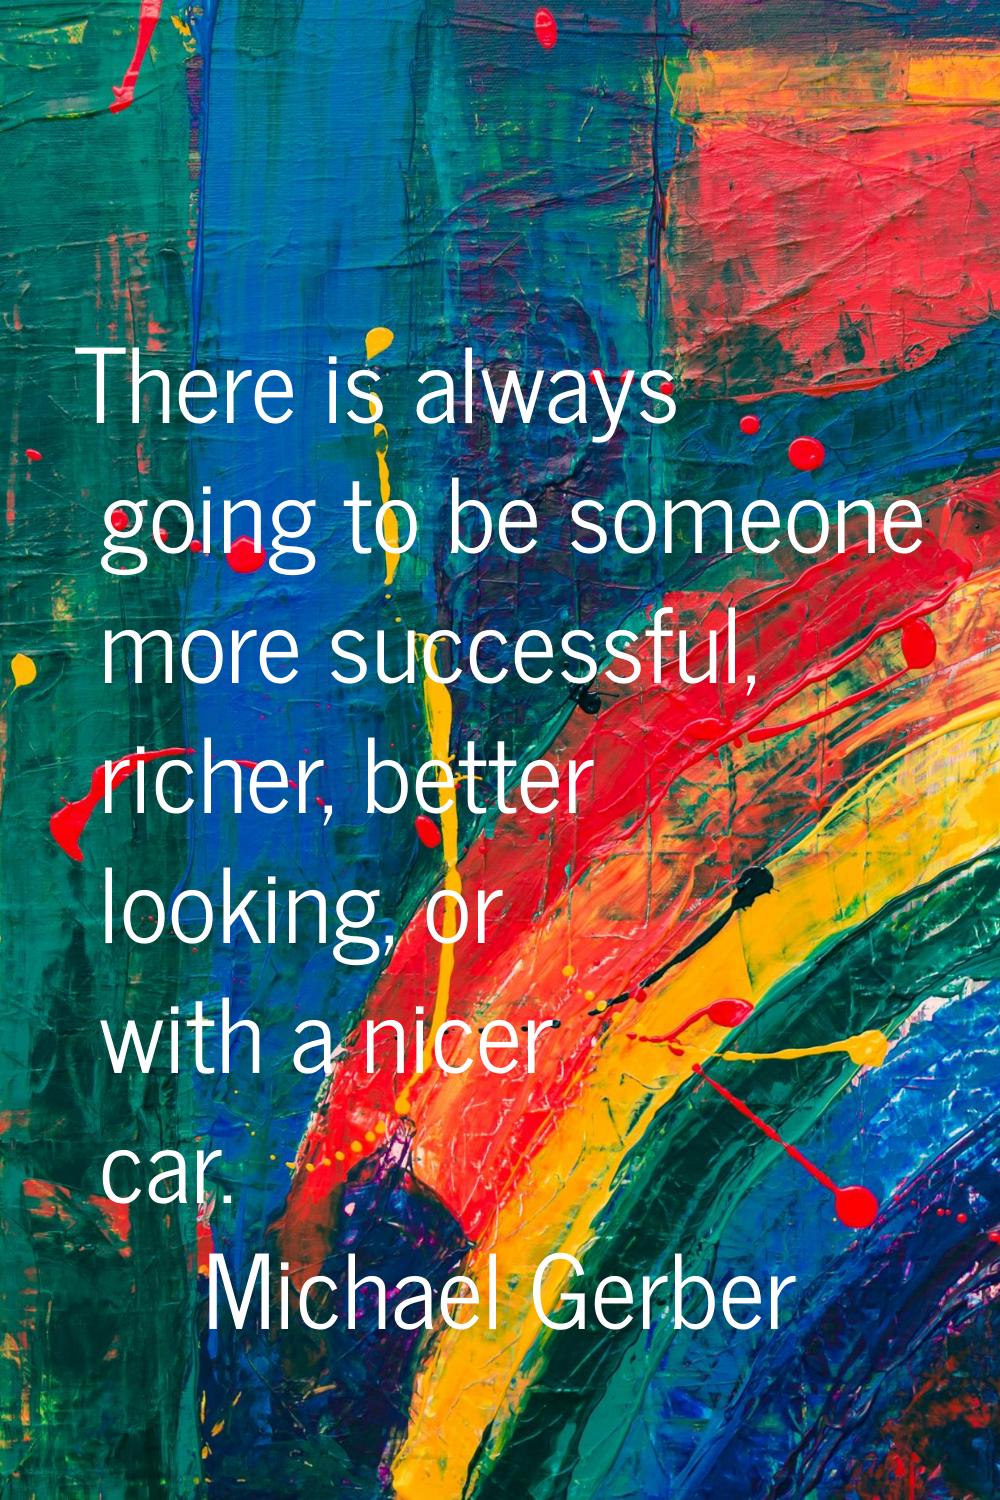 There is always going to be someone more successful, richer, better looking, or with a nicer car.